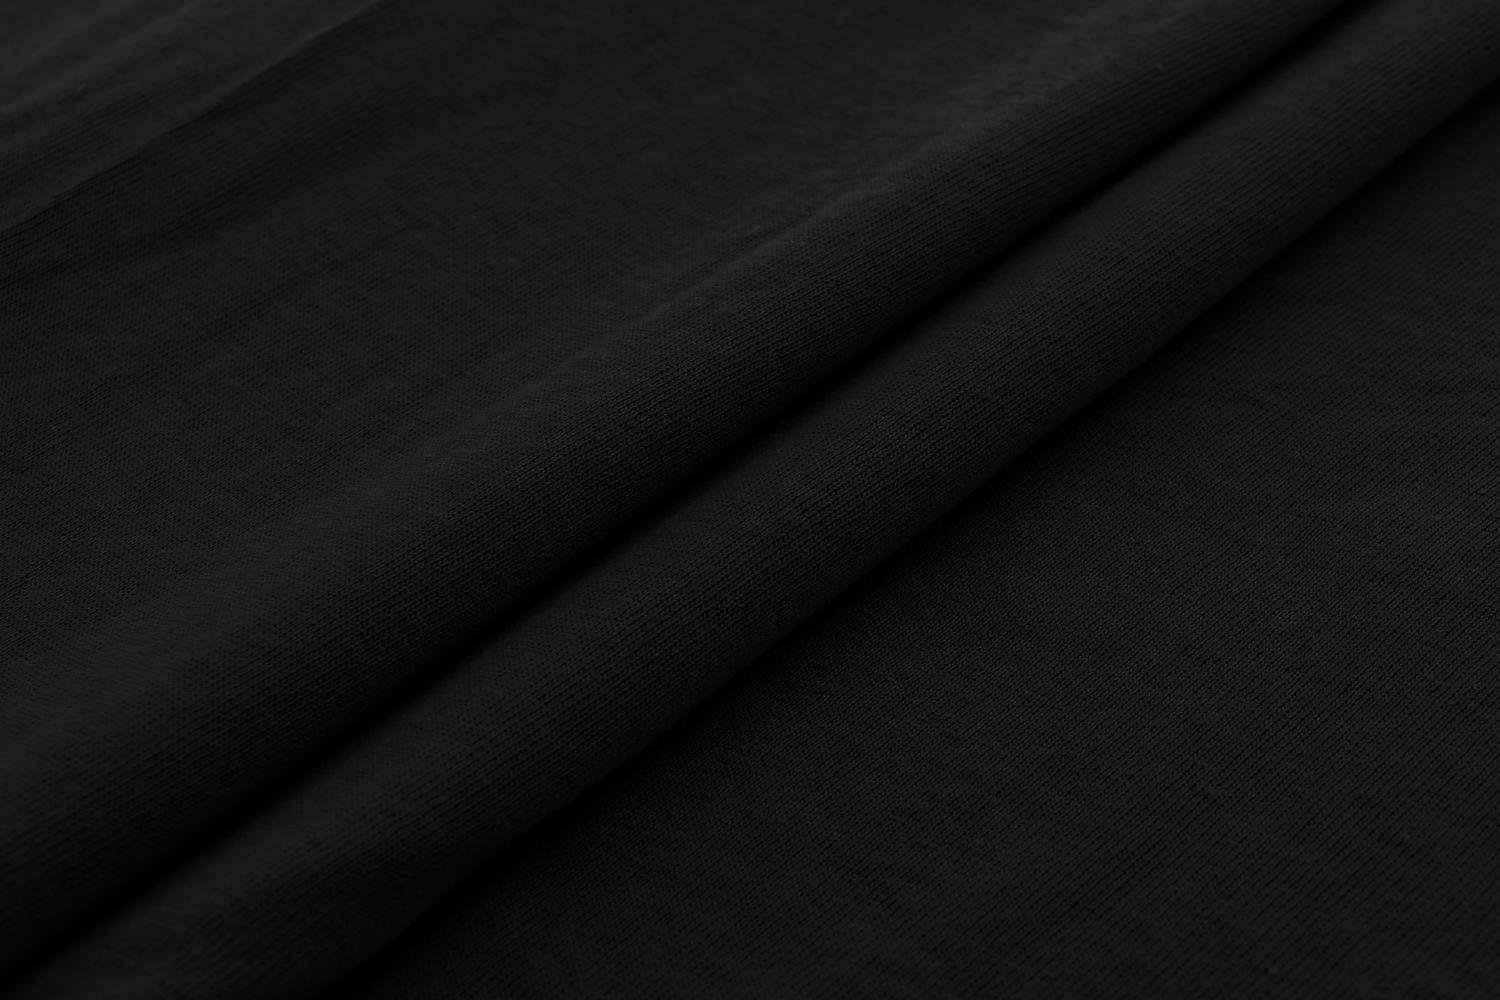 Black Pure Soft Cotton by the Yard, kulir Soft Lightweigth 100% Cotton  Fabric for Pajamas, Sportswear, Dresses -  Canada